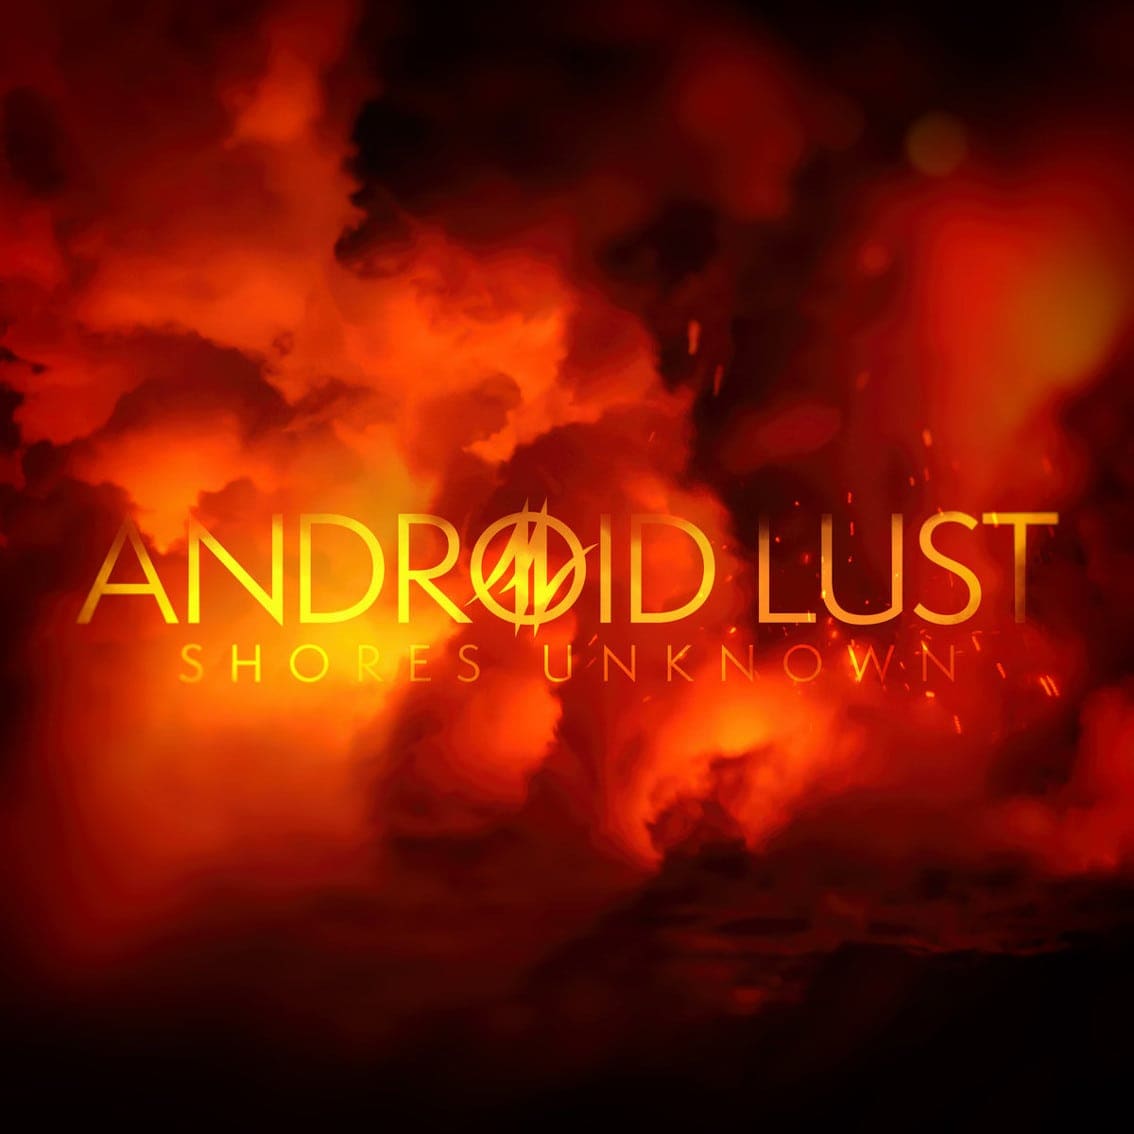 Android Lust self-releases new EP'Shores Unknown' - preview here